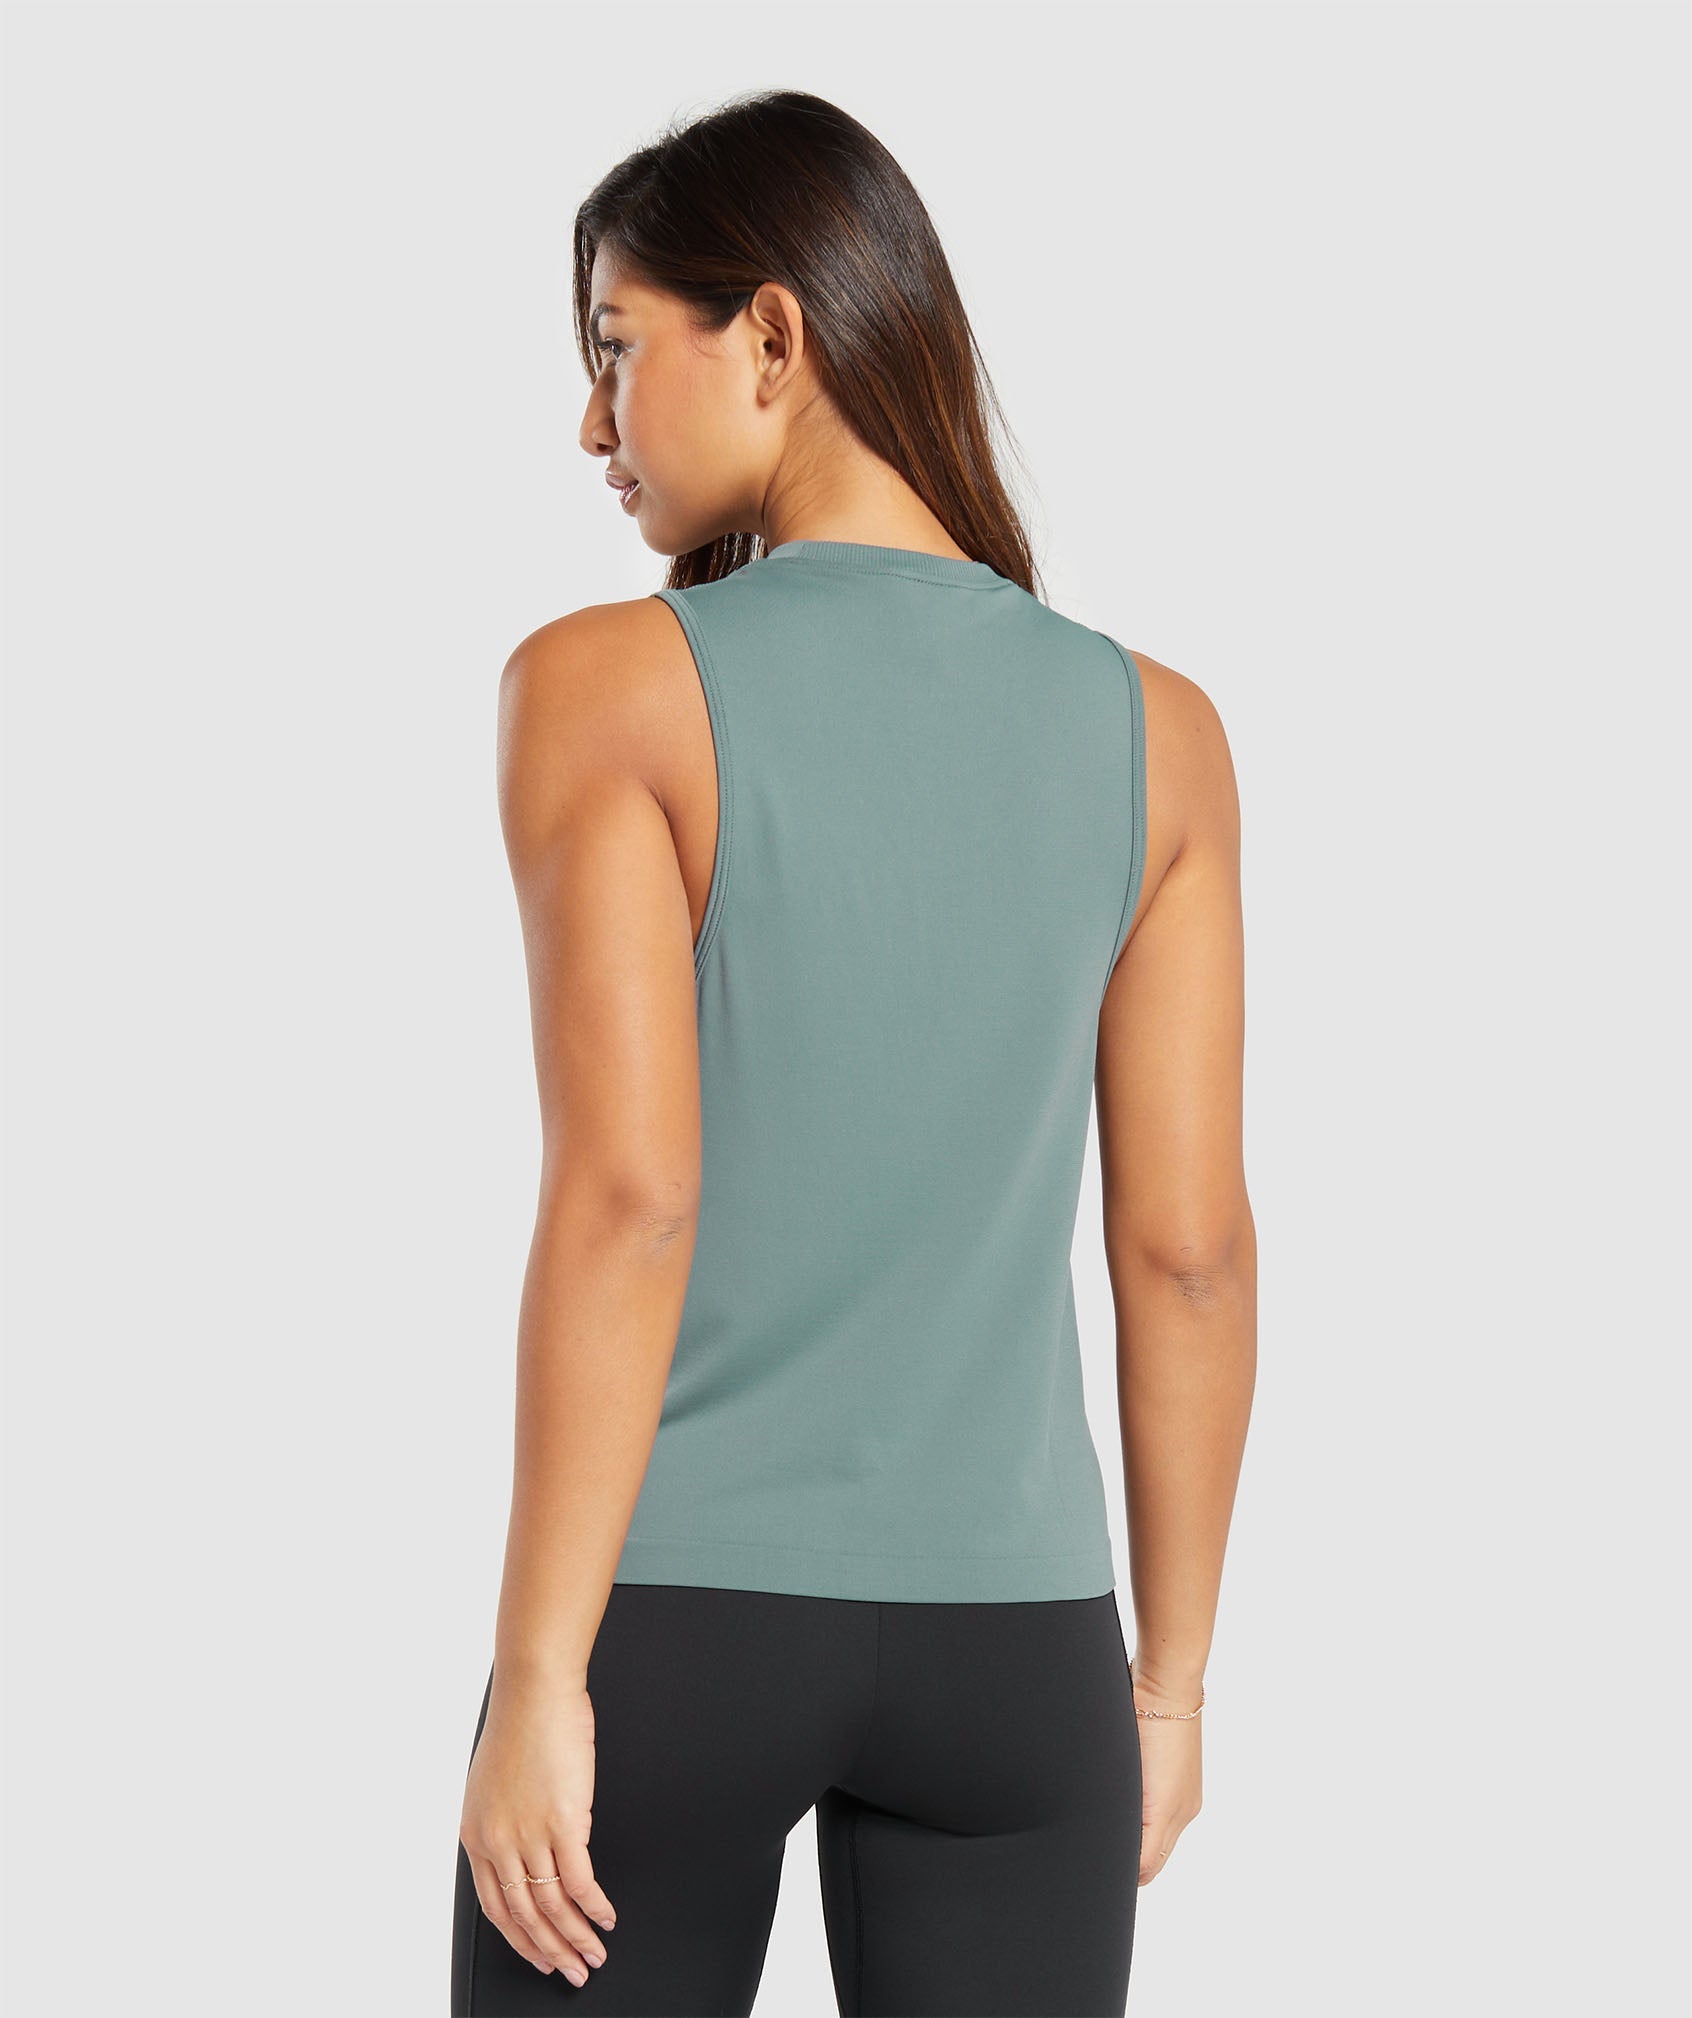 Everyday Seamless Tank in Cargo Teal - view 2